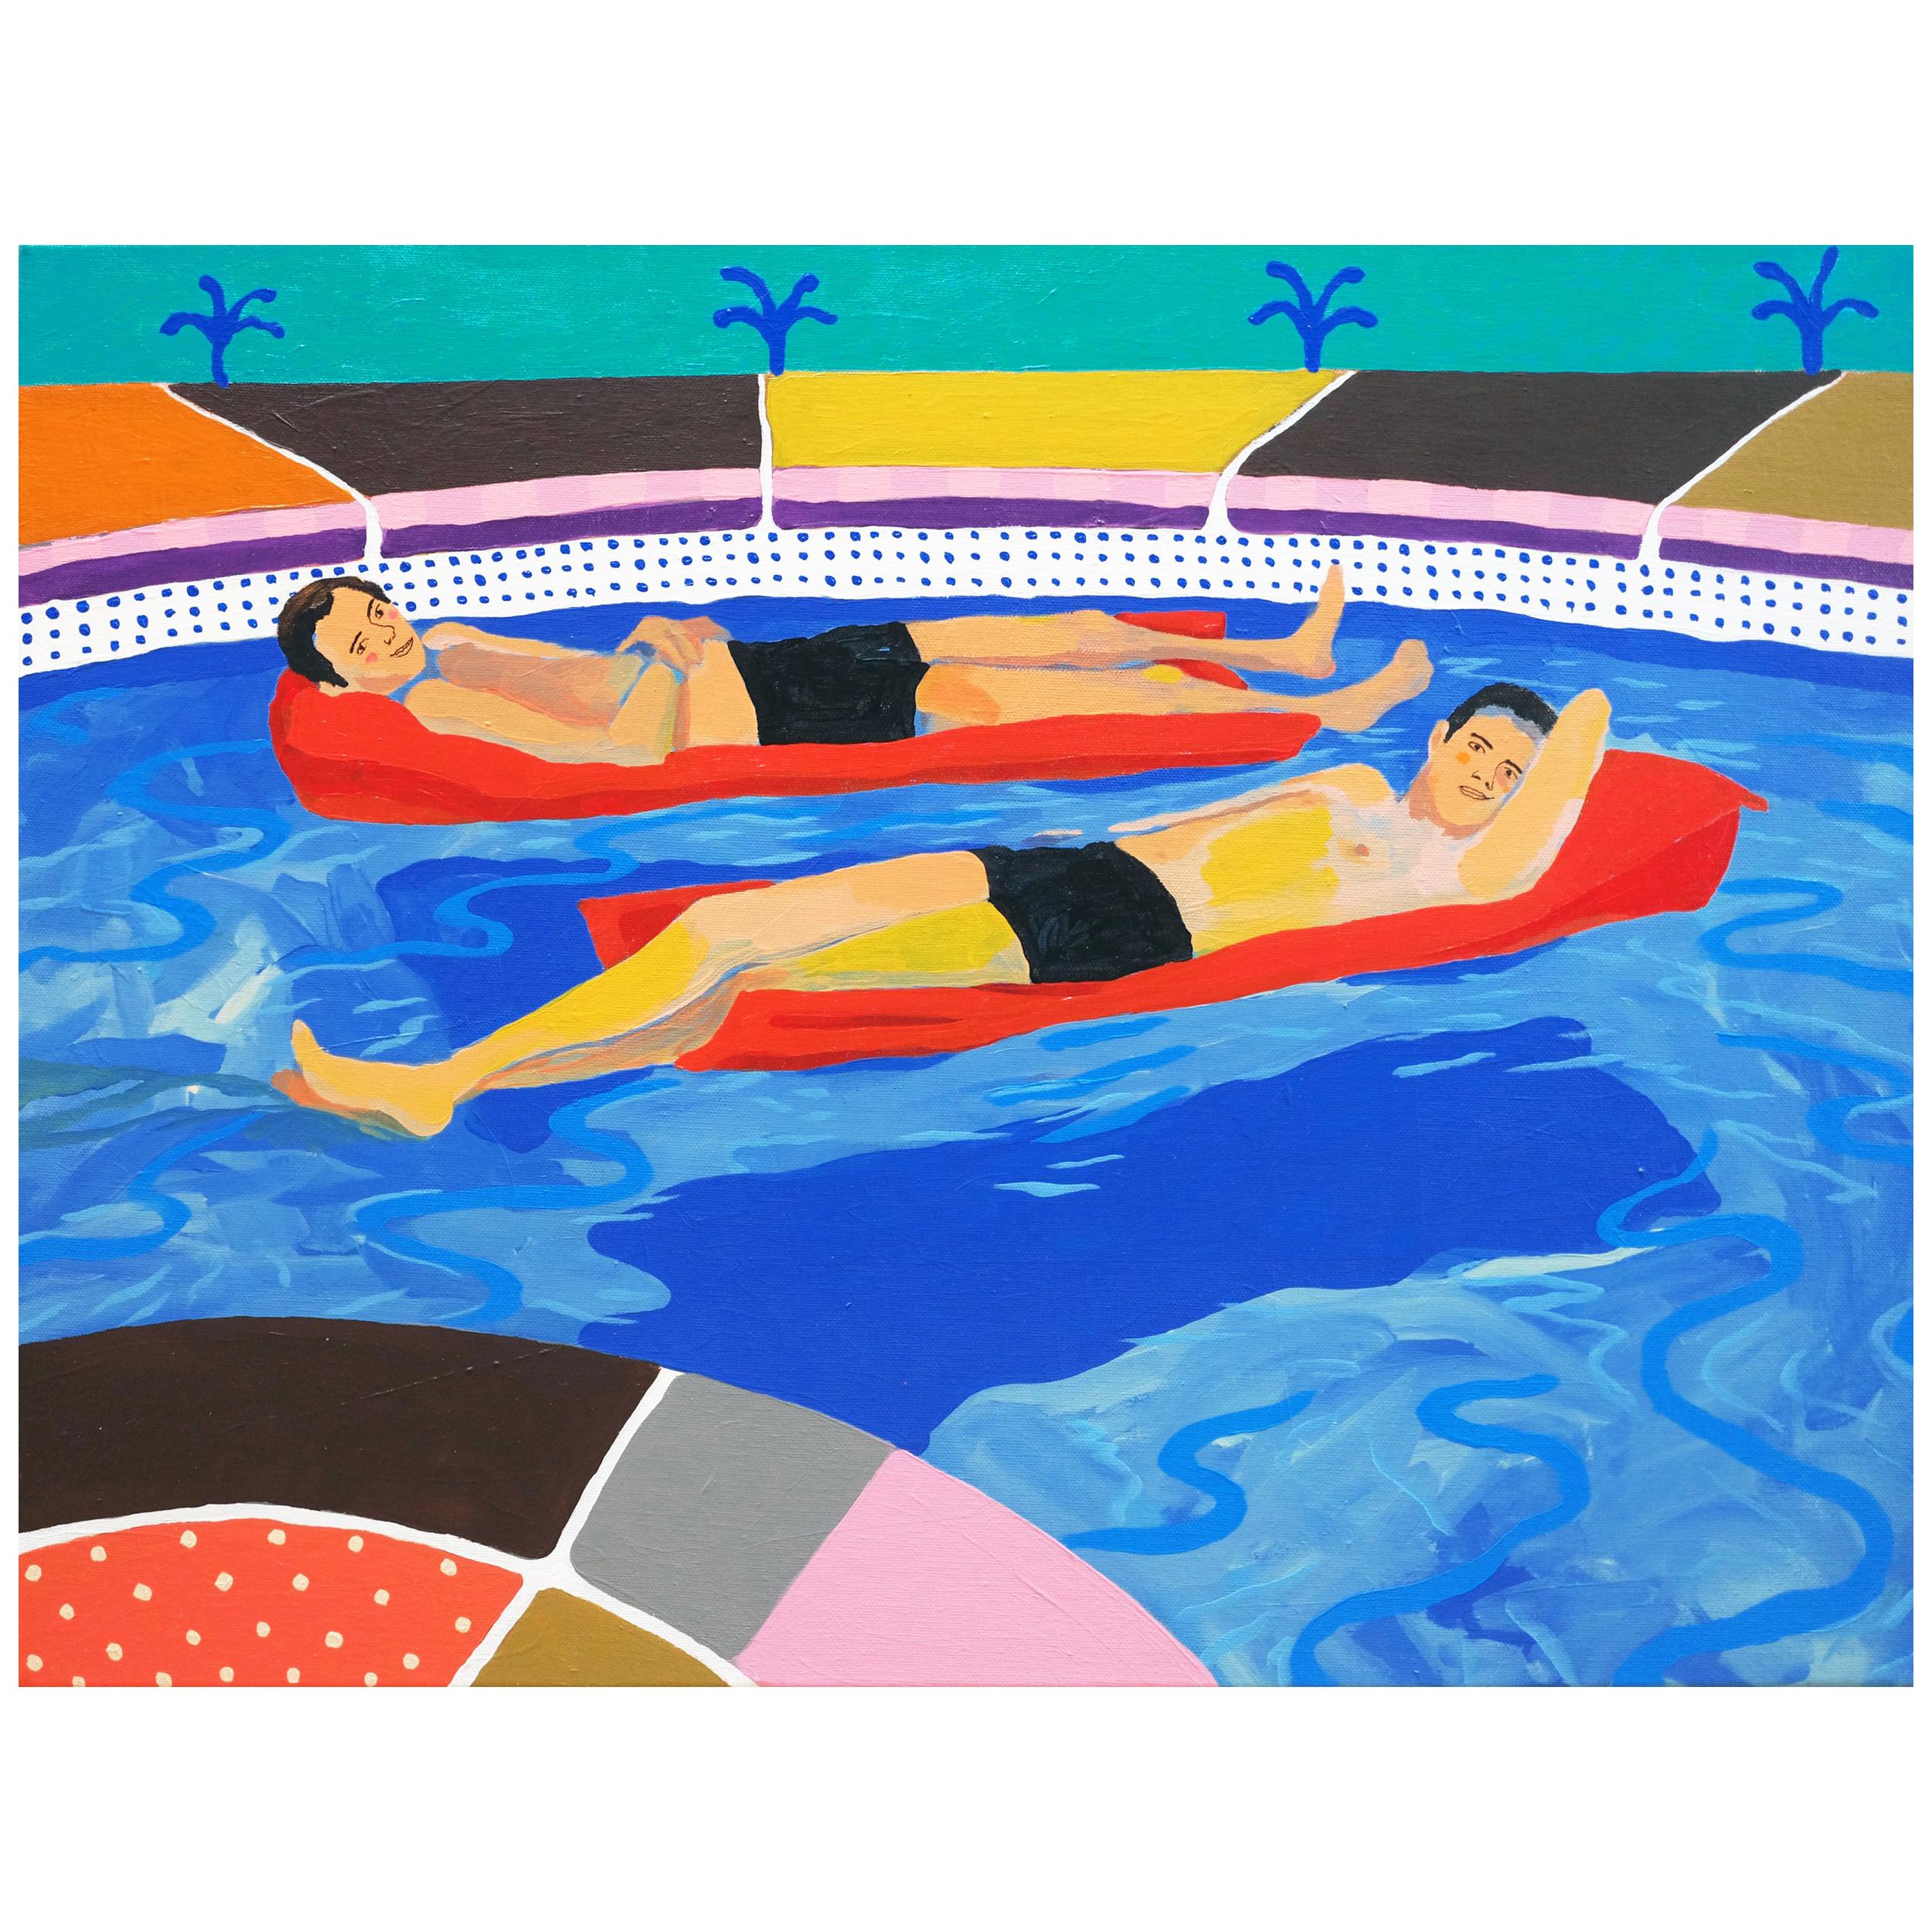 'Floating Around' Portrait Painting by Alan Fears Pop Art